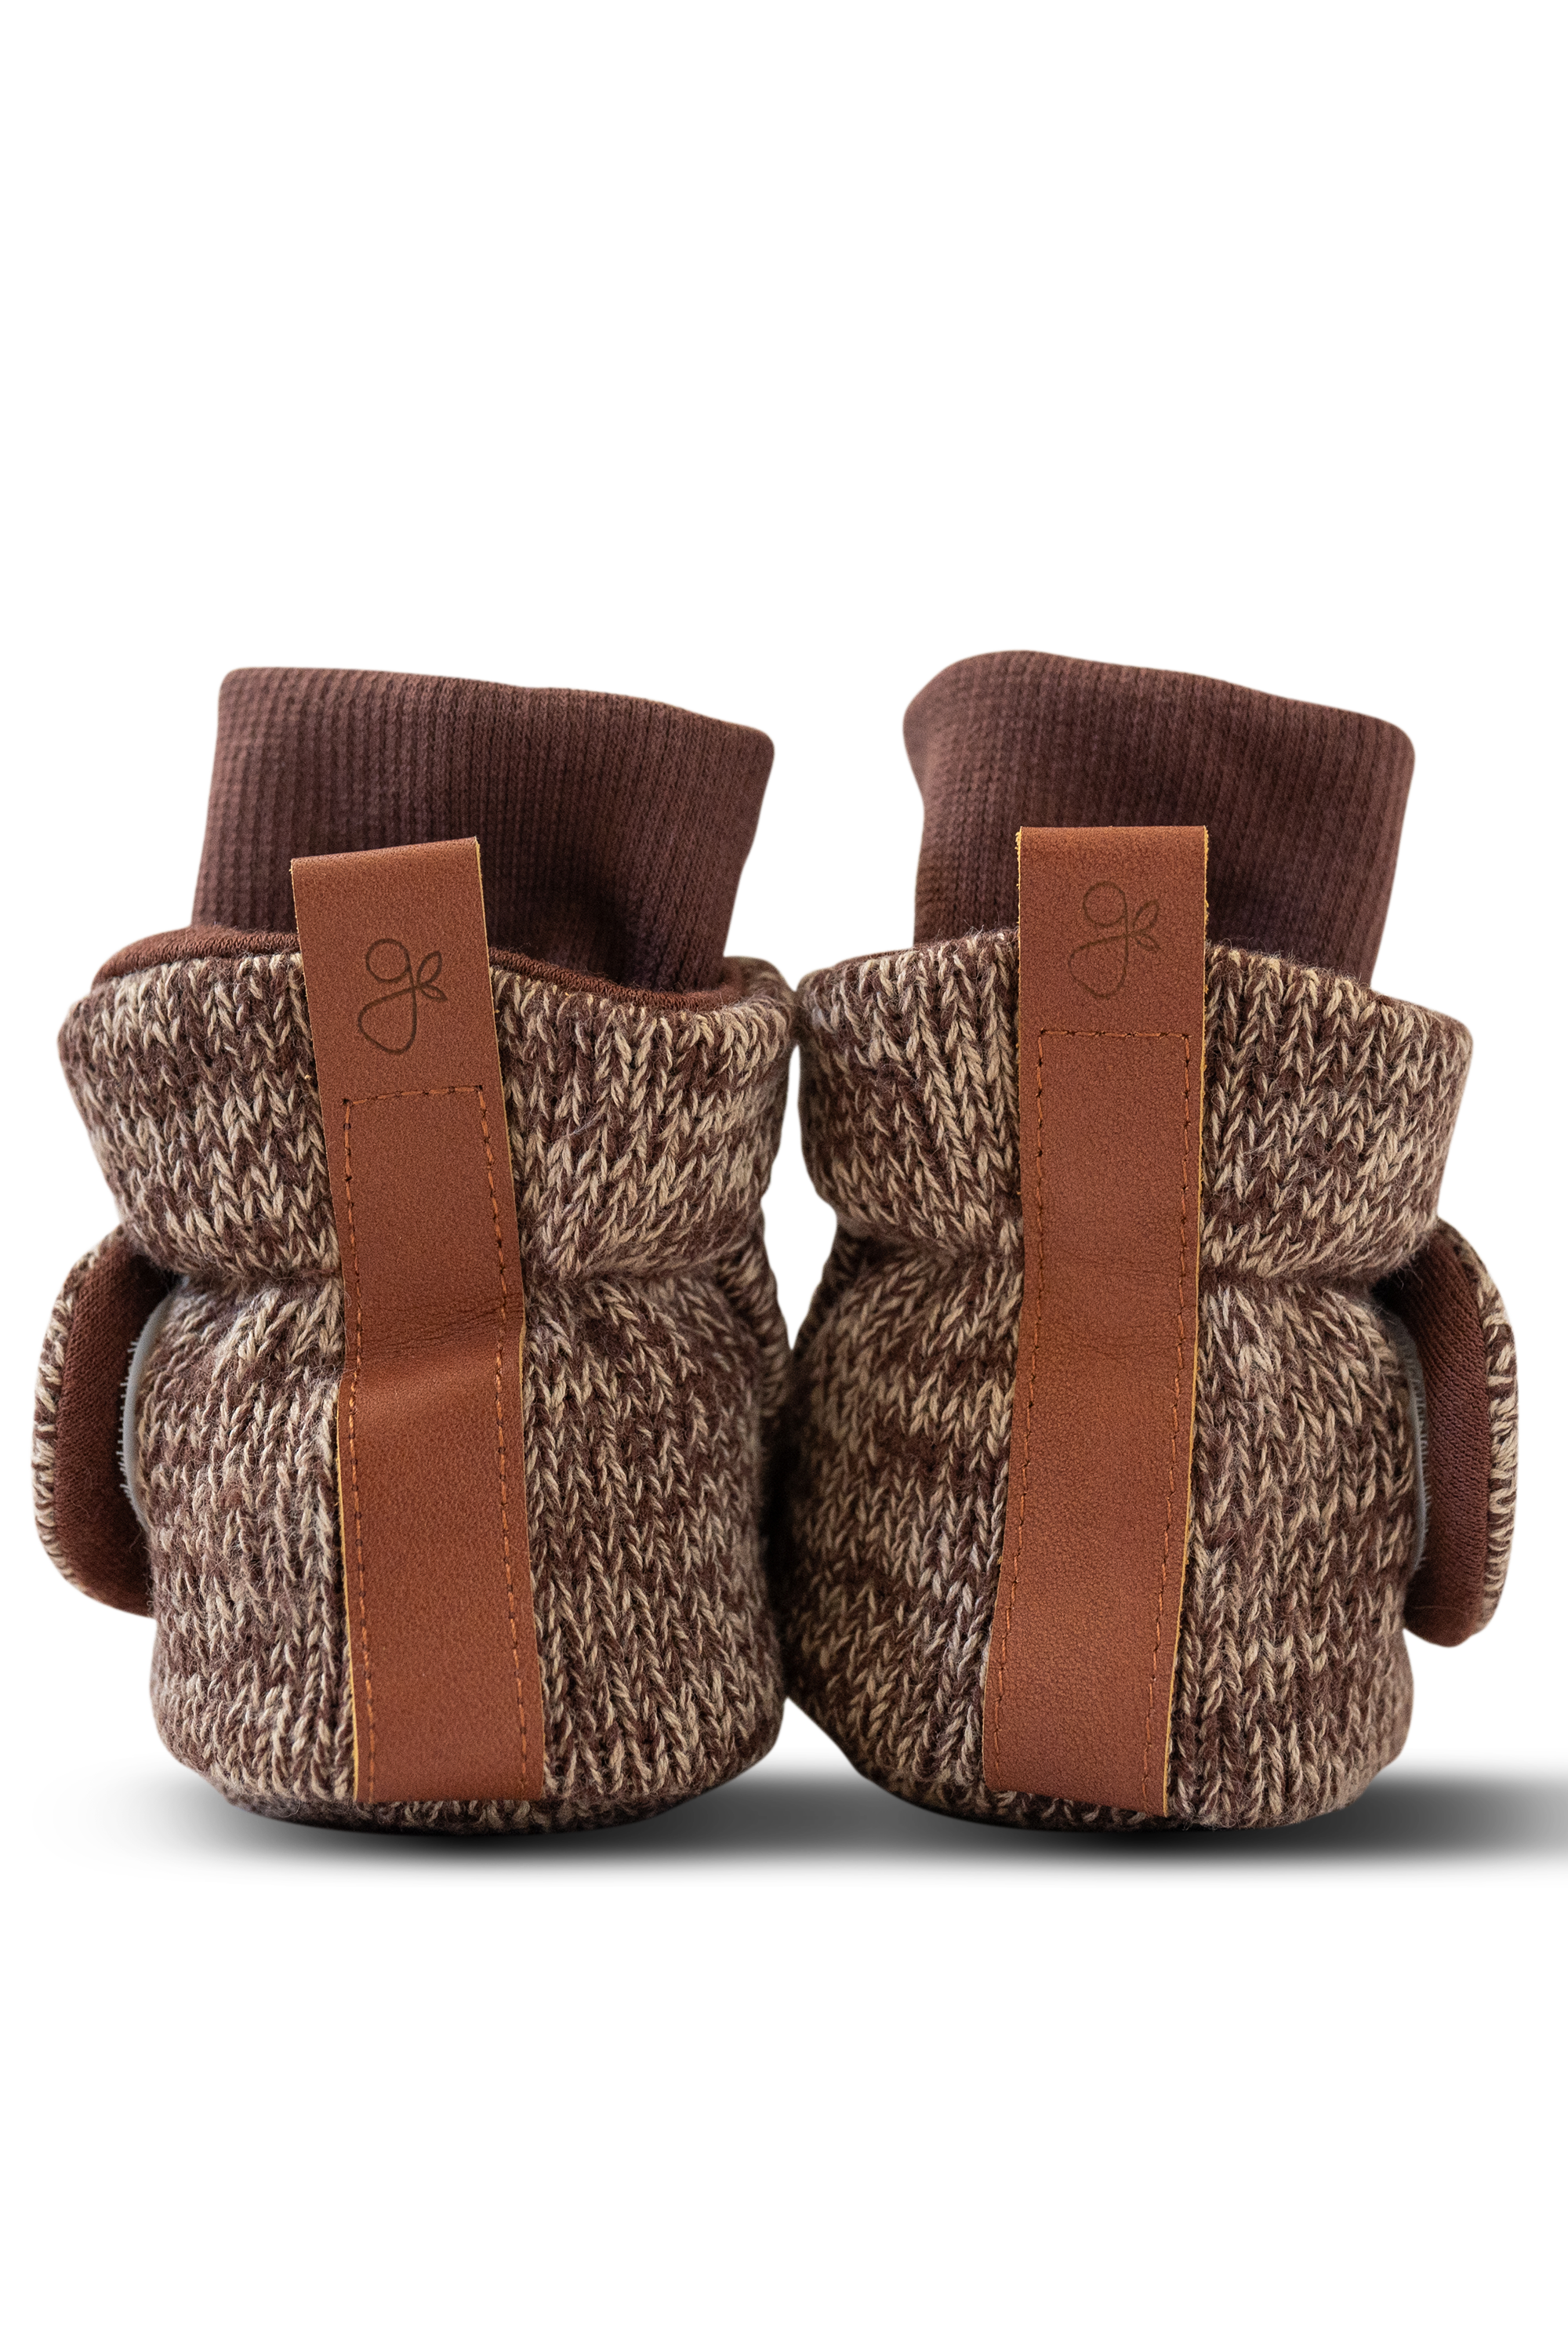 STAY ON KNIT BOOTS | BARK